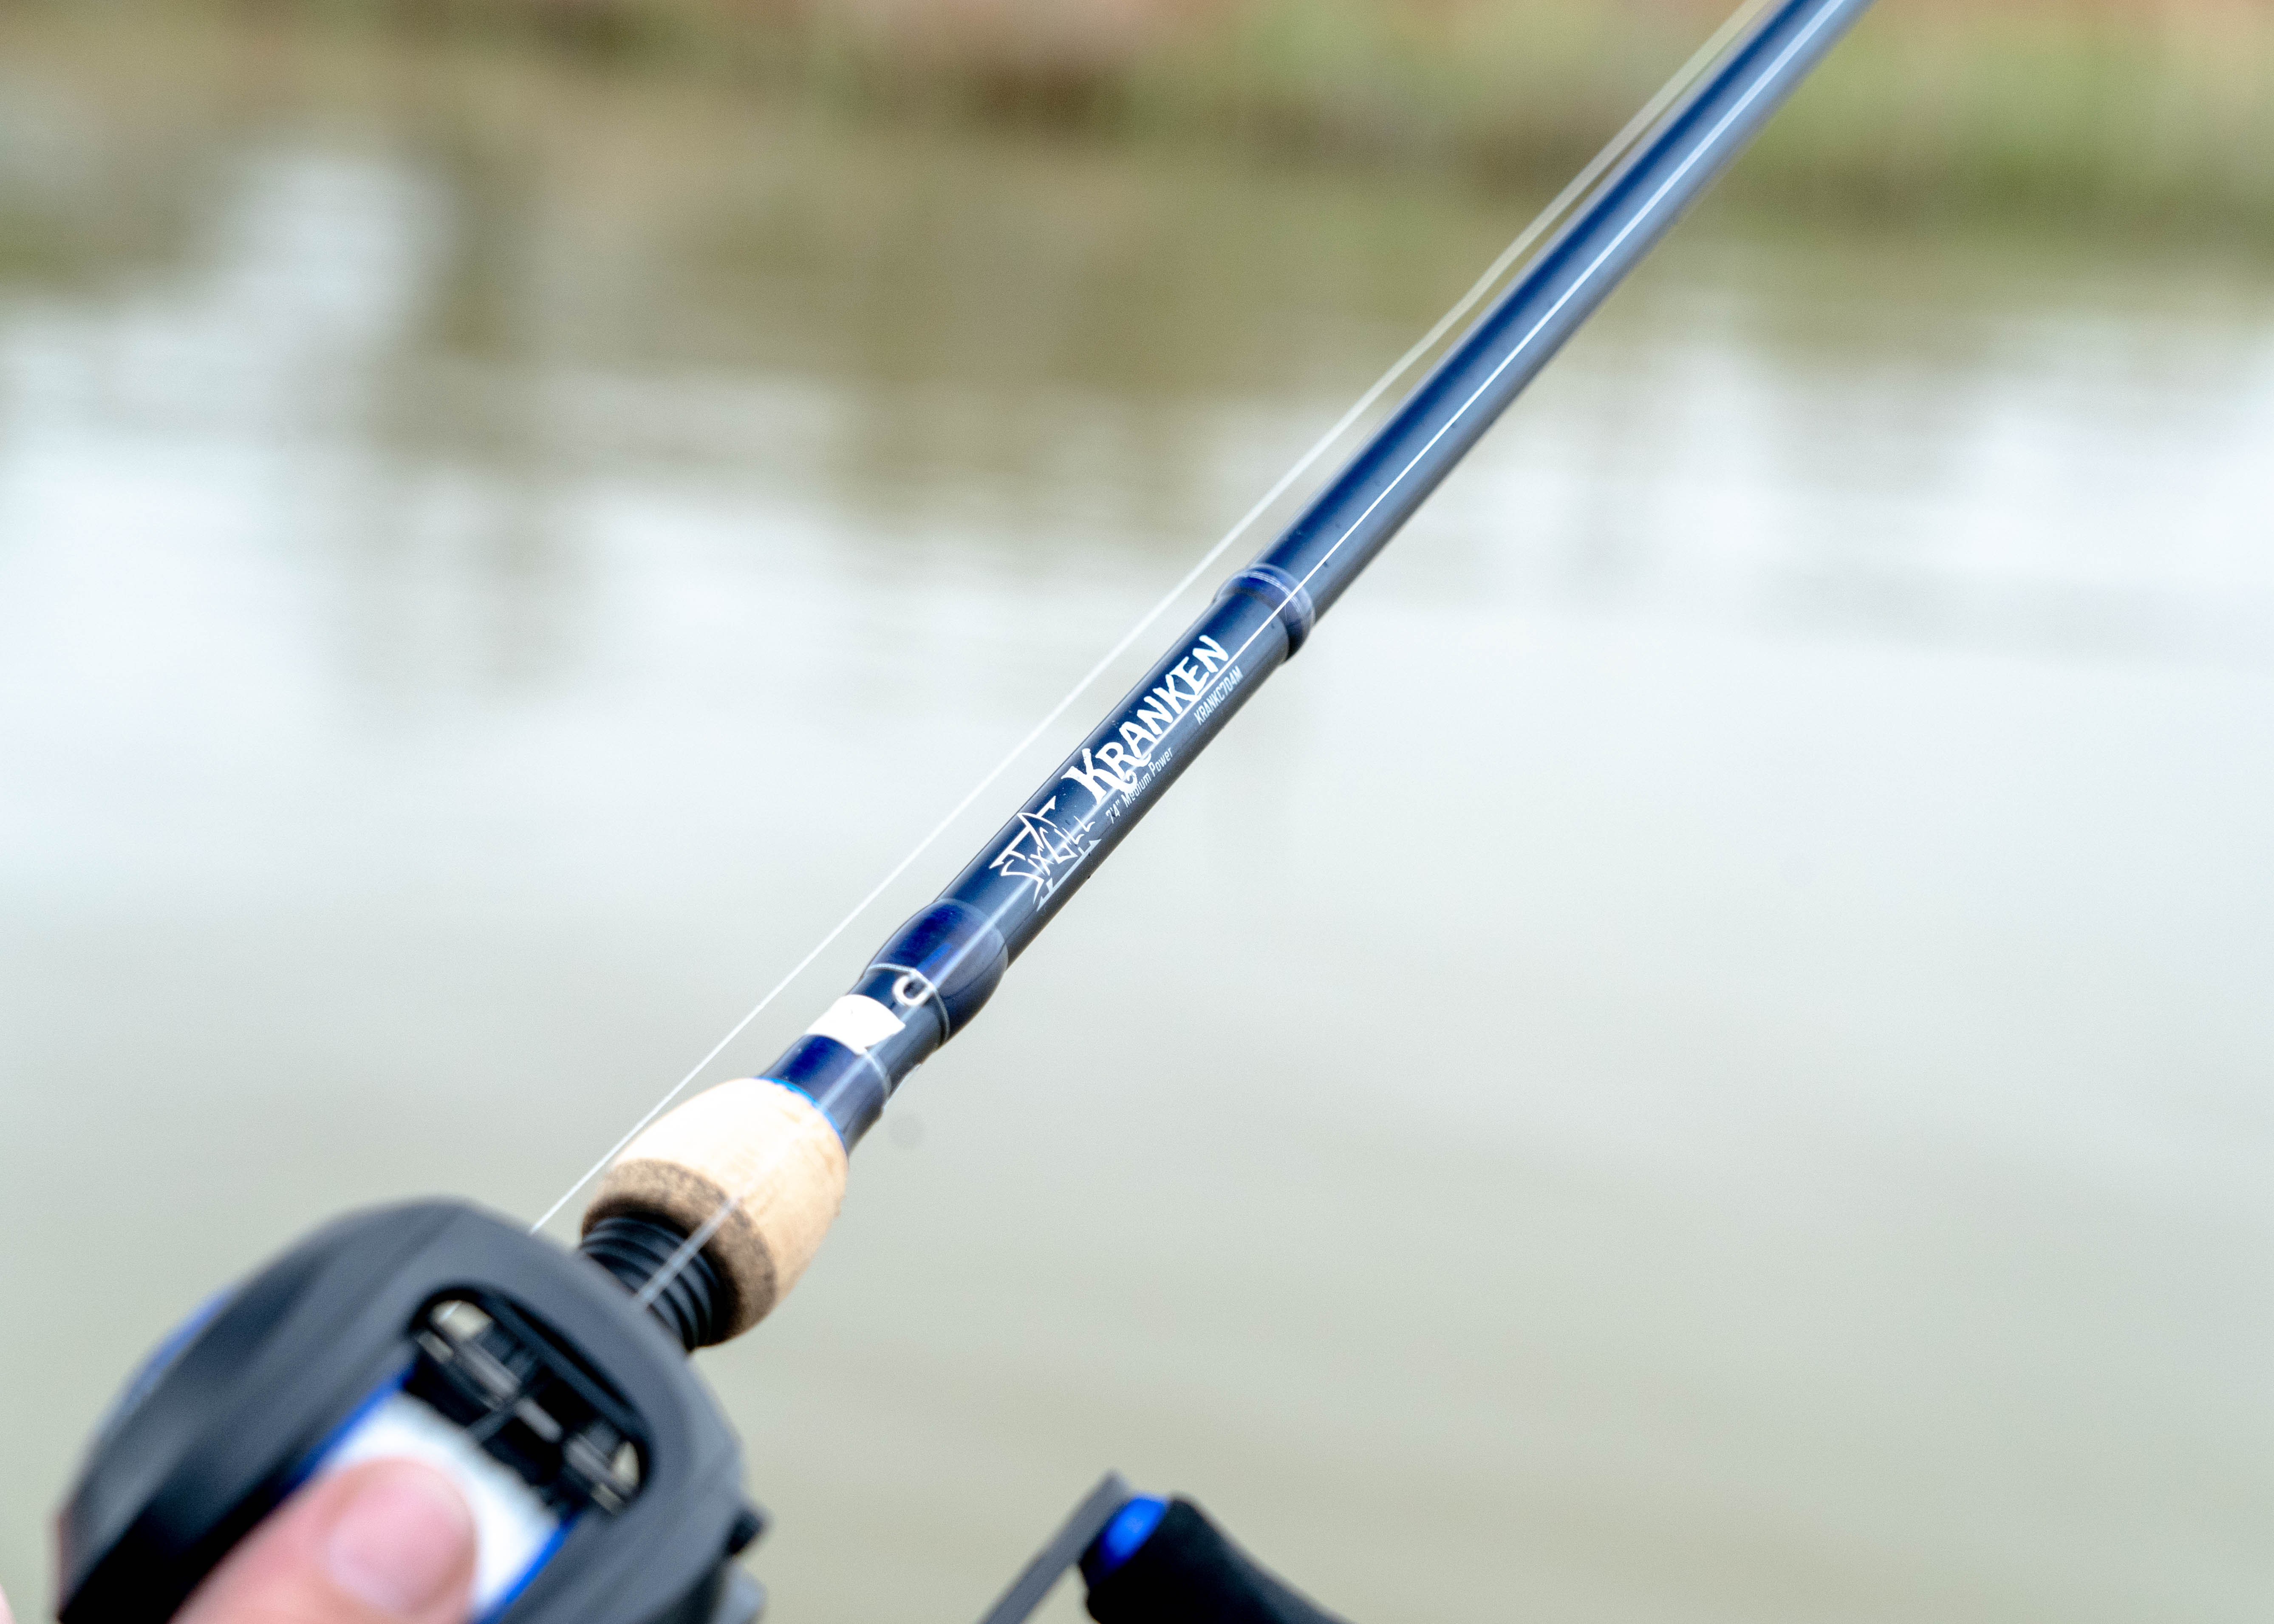 Sixgill Fishing Products